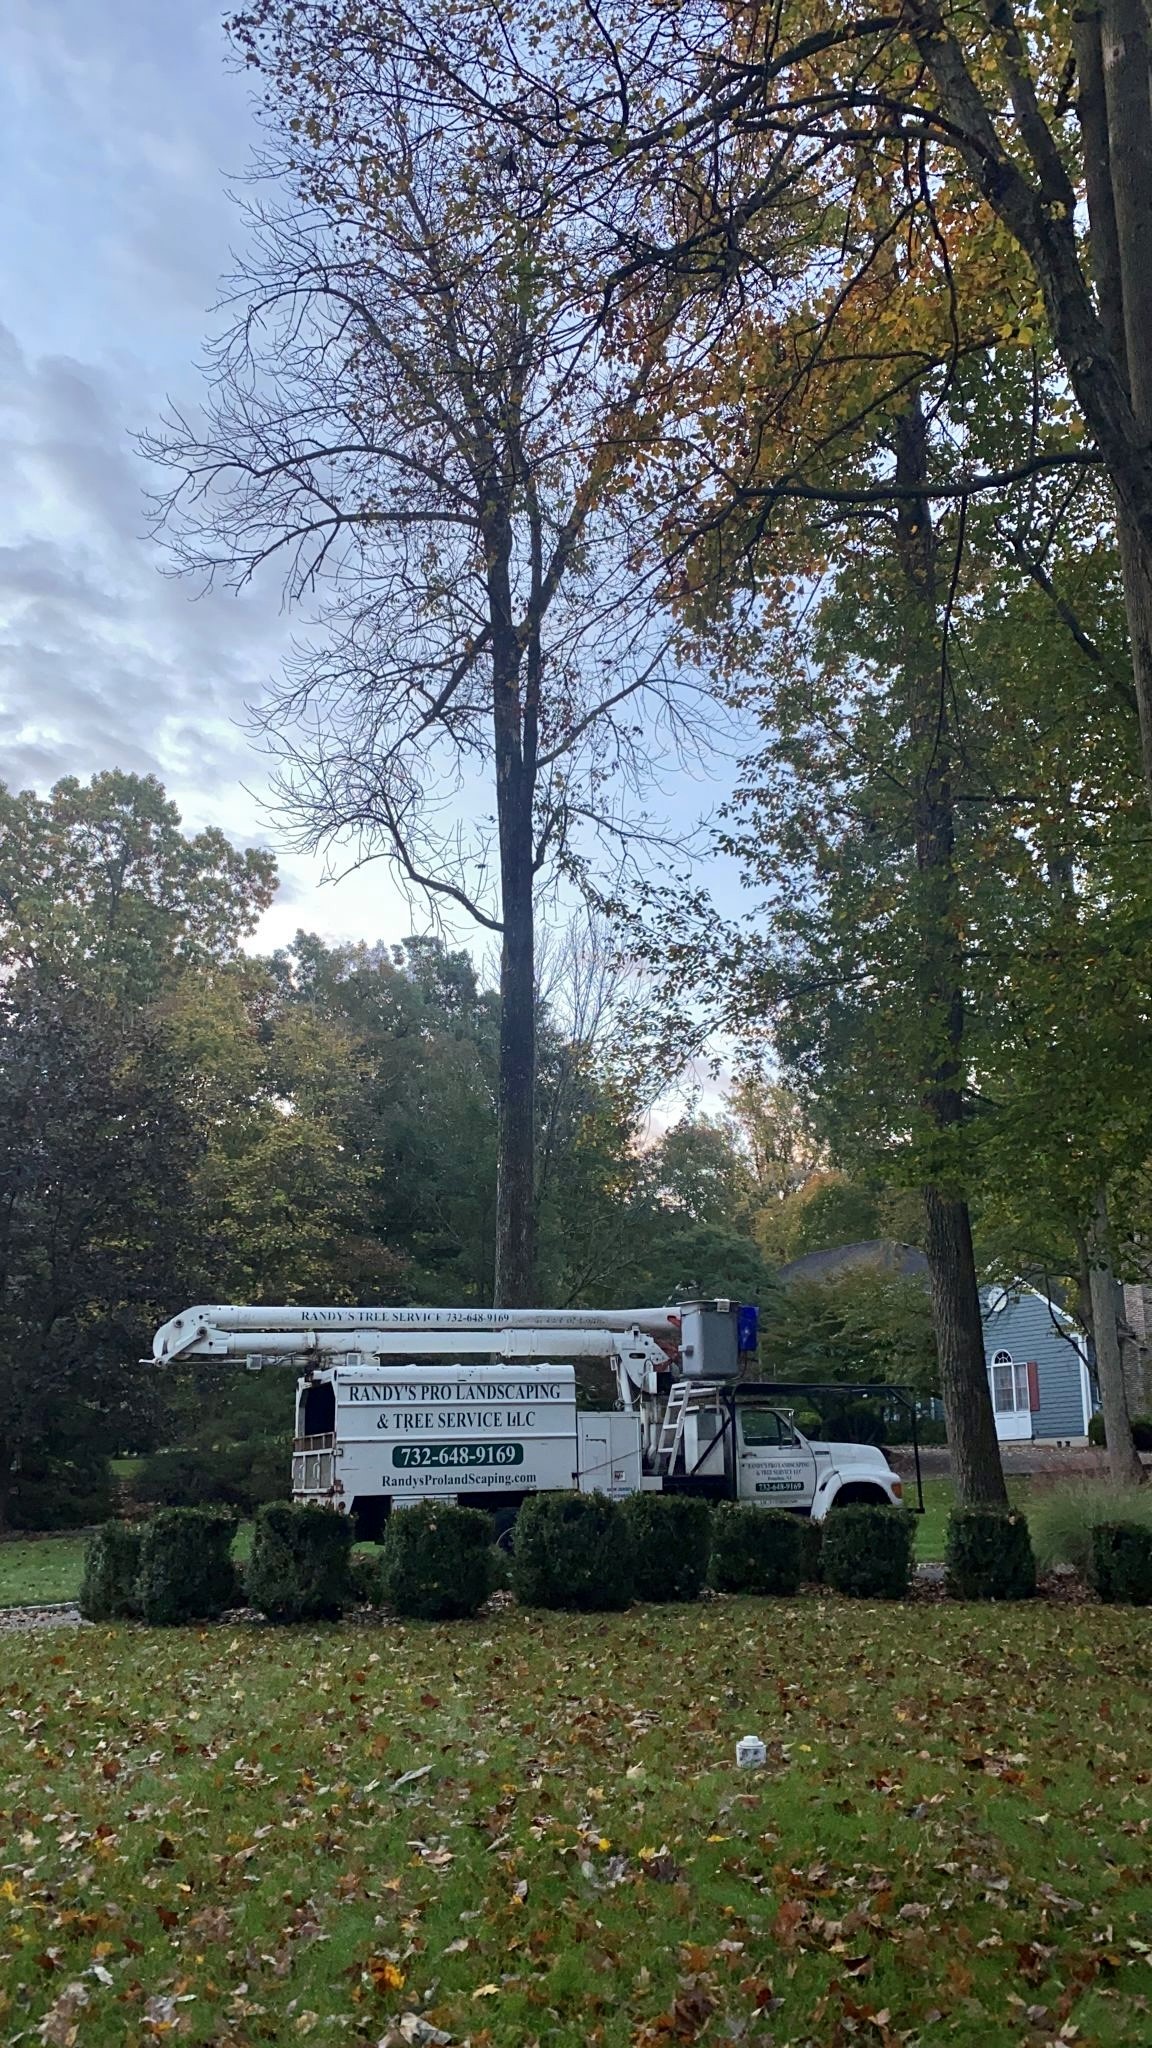 Tree Service in Somerville,NJ on Fairview Ave